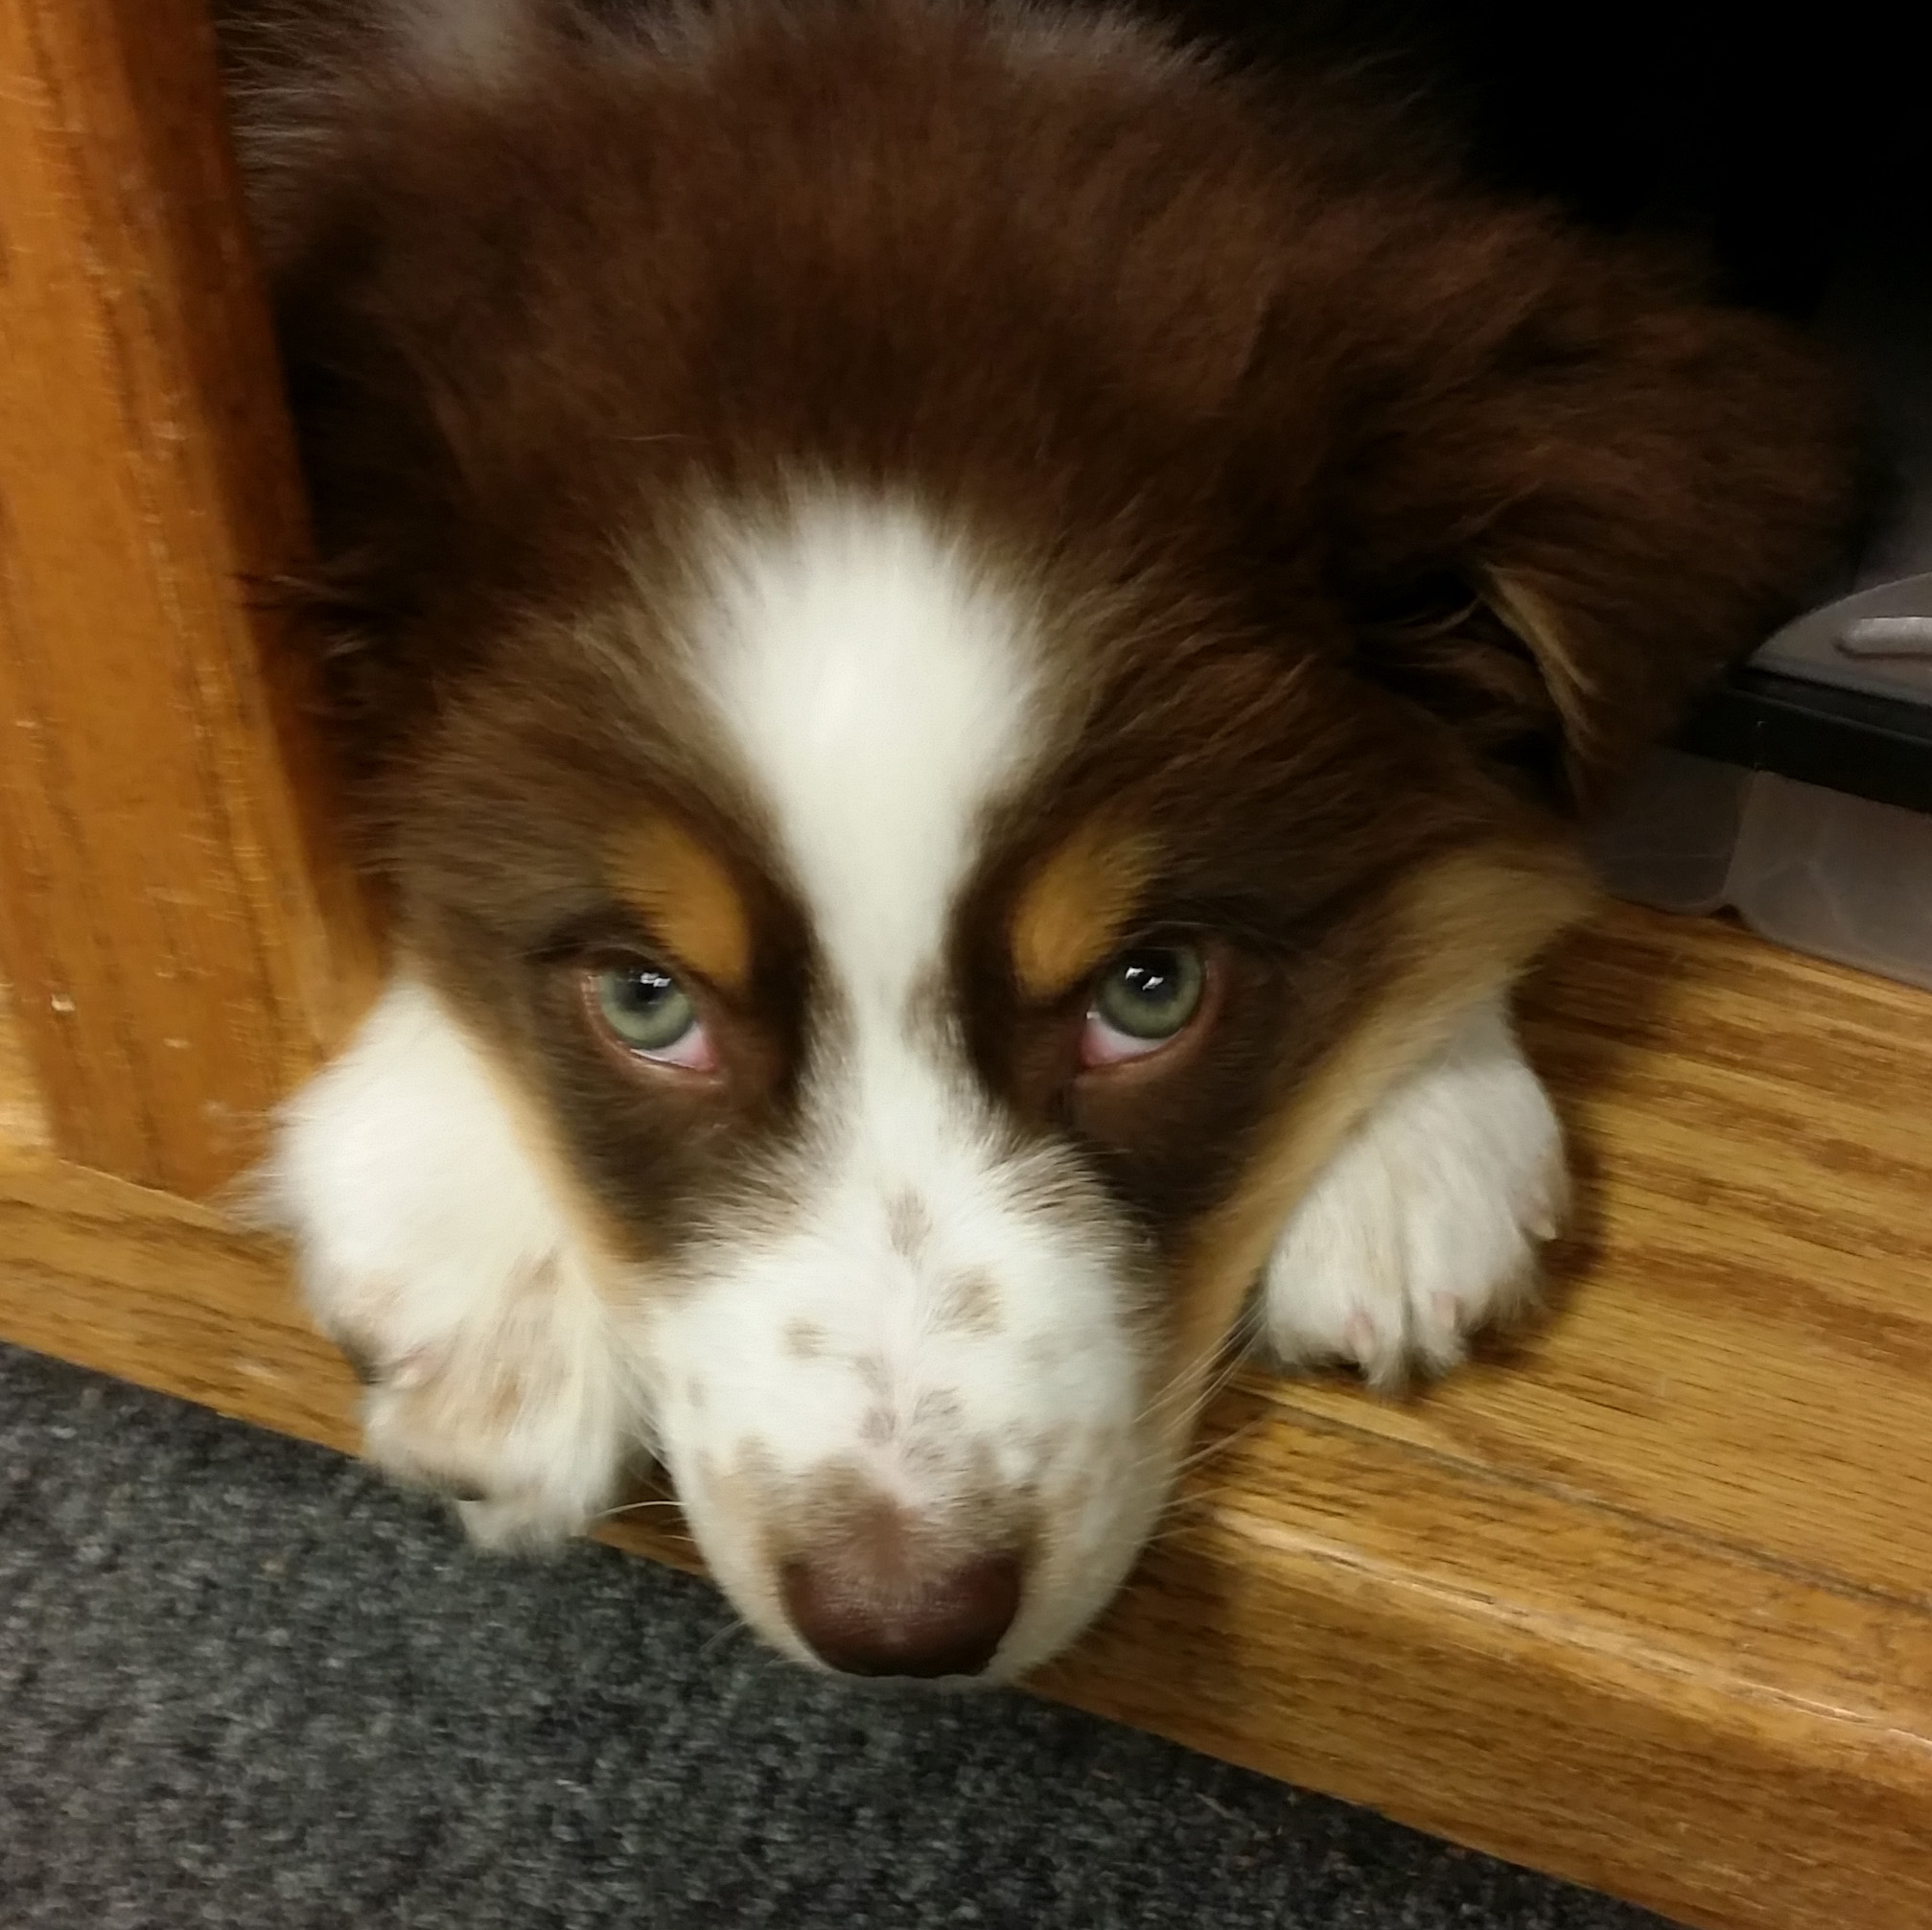 Lounging at (under) his desk, Skipjack Nautical Wares shop puppy